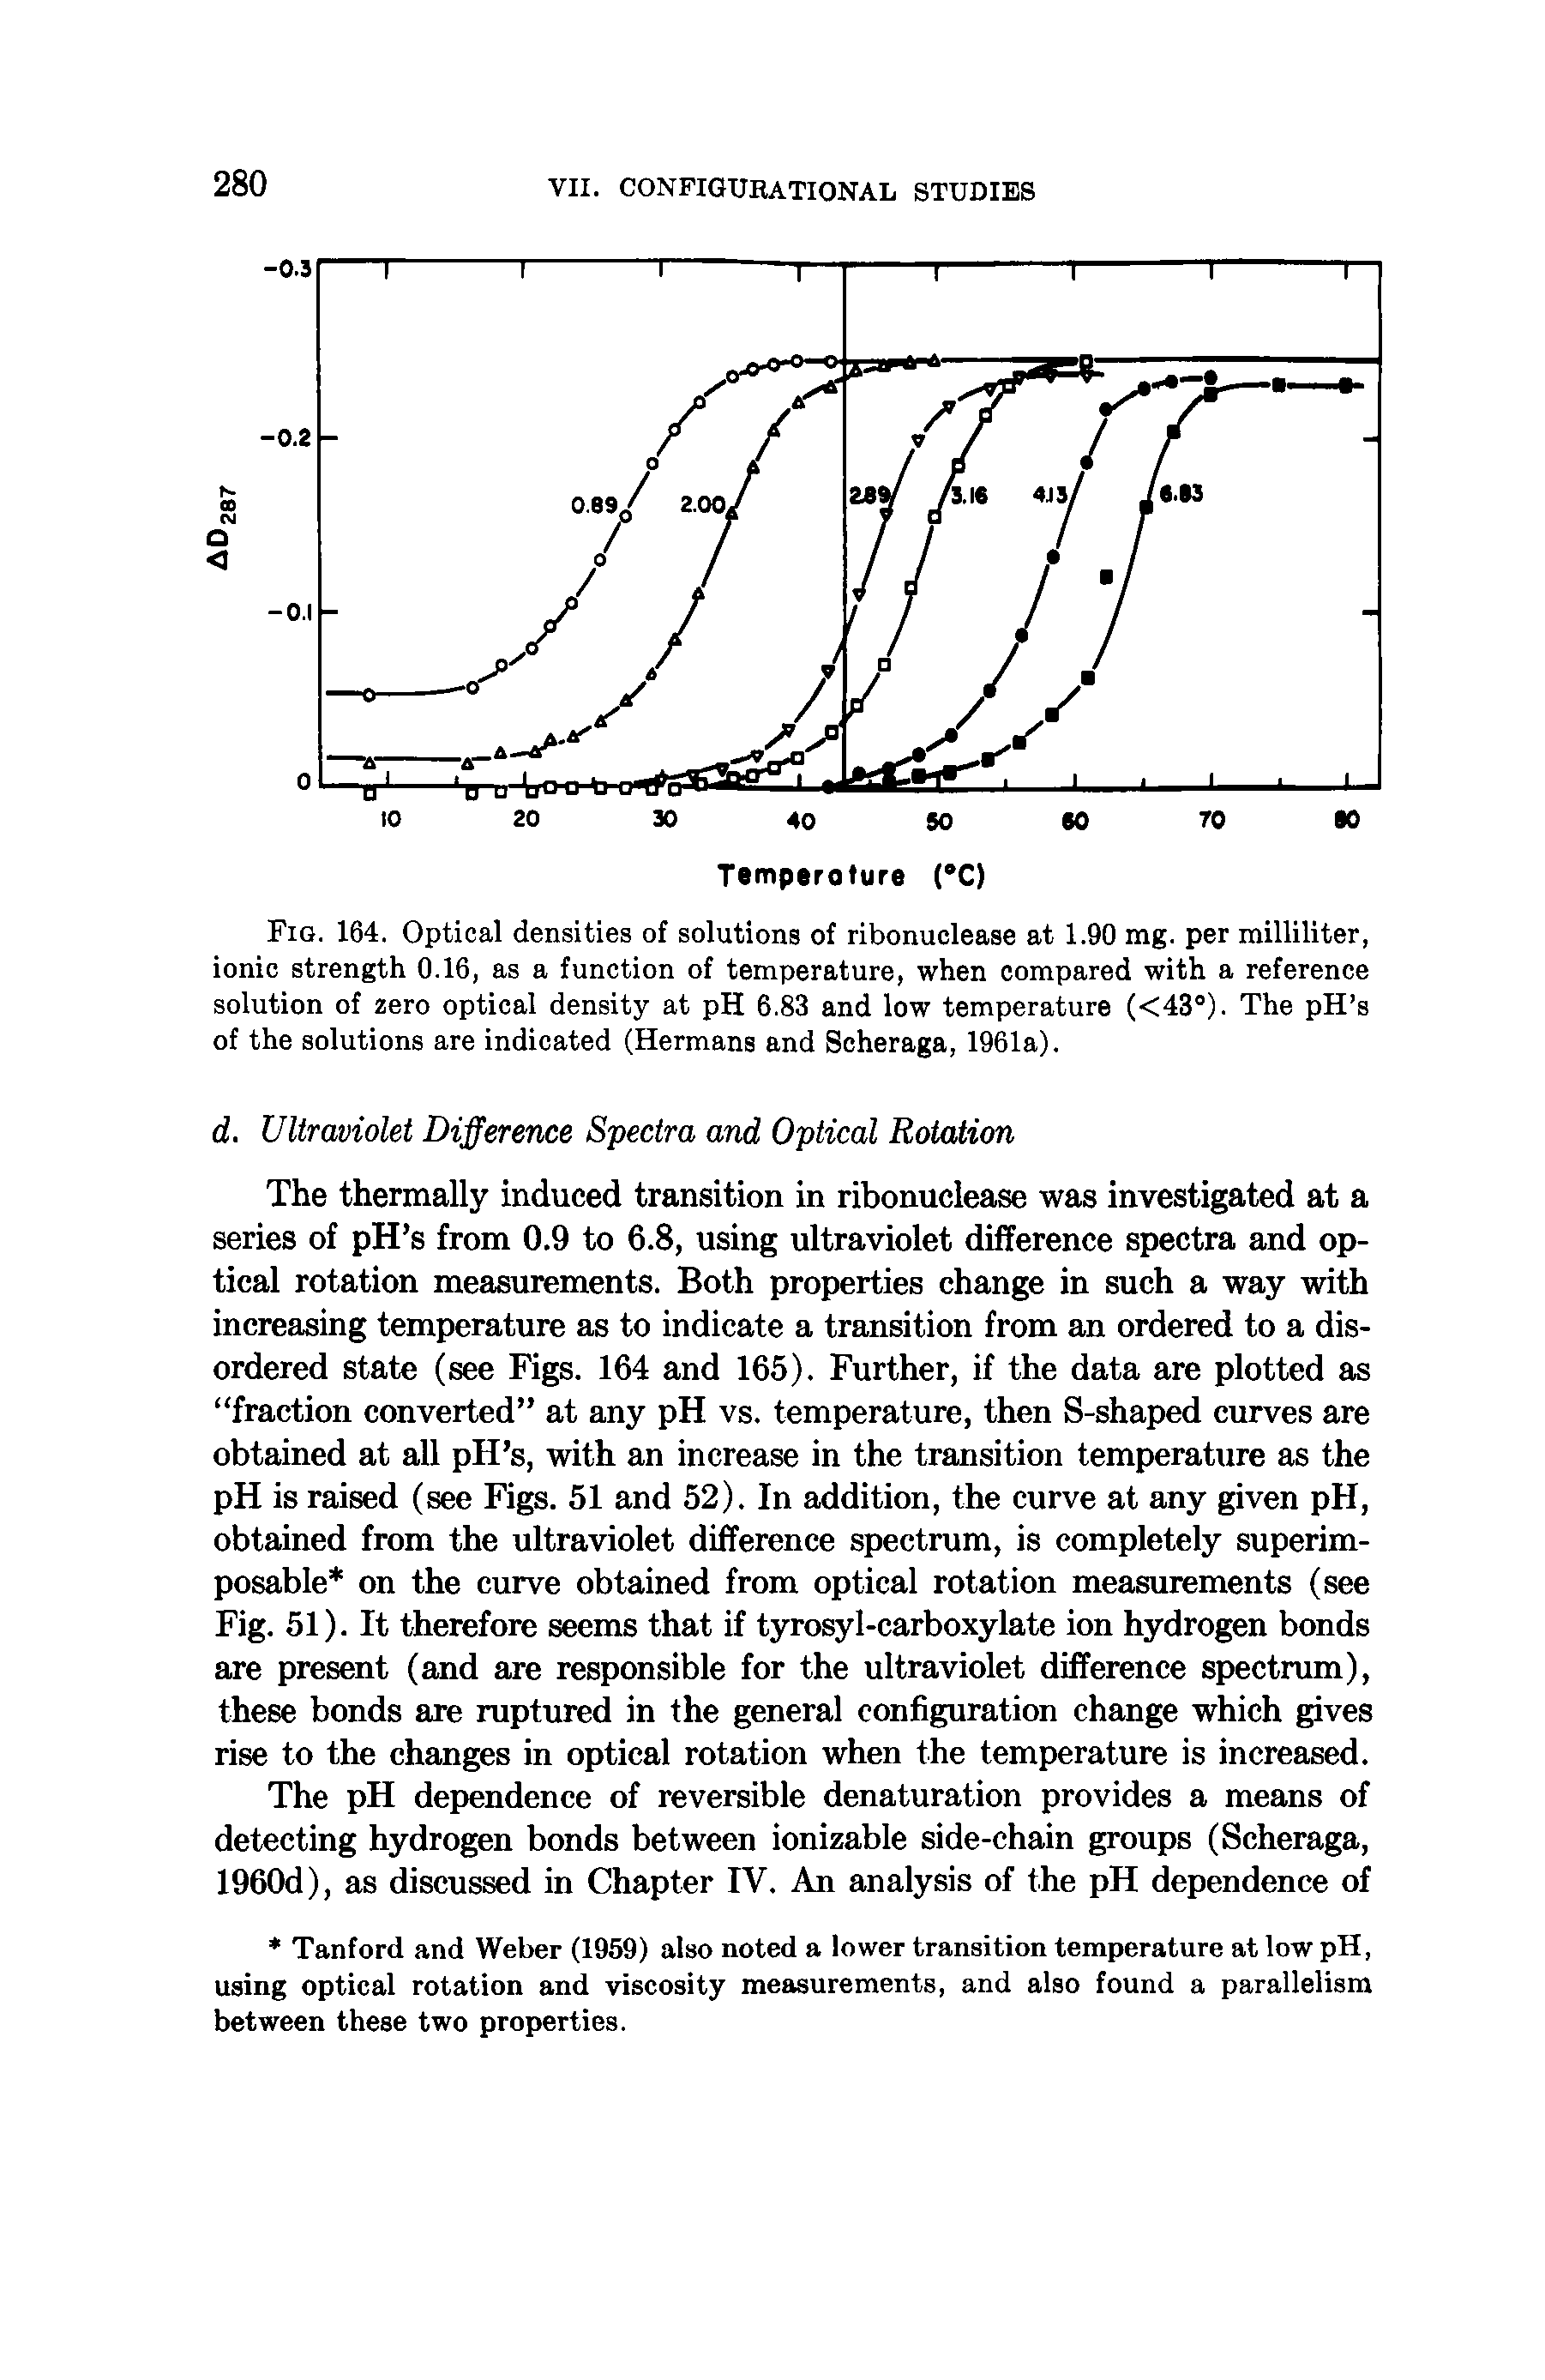 Fig. 164. Optical densities of solutions of ribonuclease at 1.90 mg. per milliliter, ionic strength 0.16, as a function of temperature, when compared with a reference solution of zero optical density at pH 6.83 and low temperature (<43 ). The pH s of the solutions are indicated (Hermans and Scheraga, 1961a).